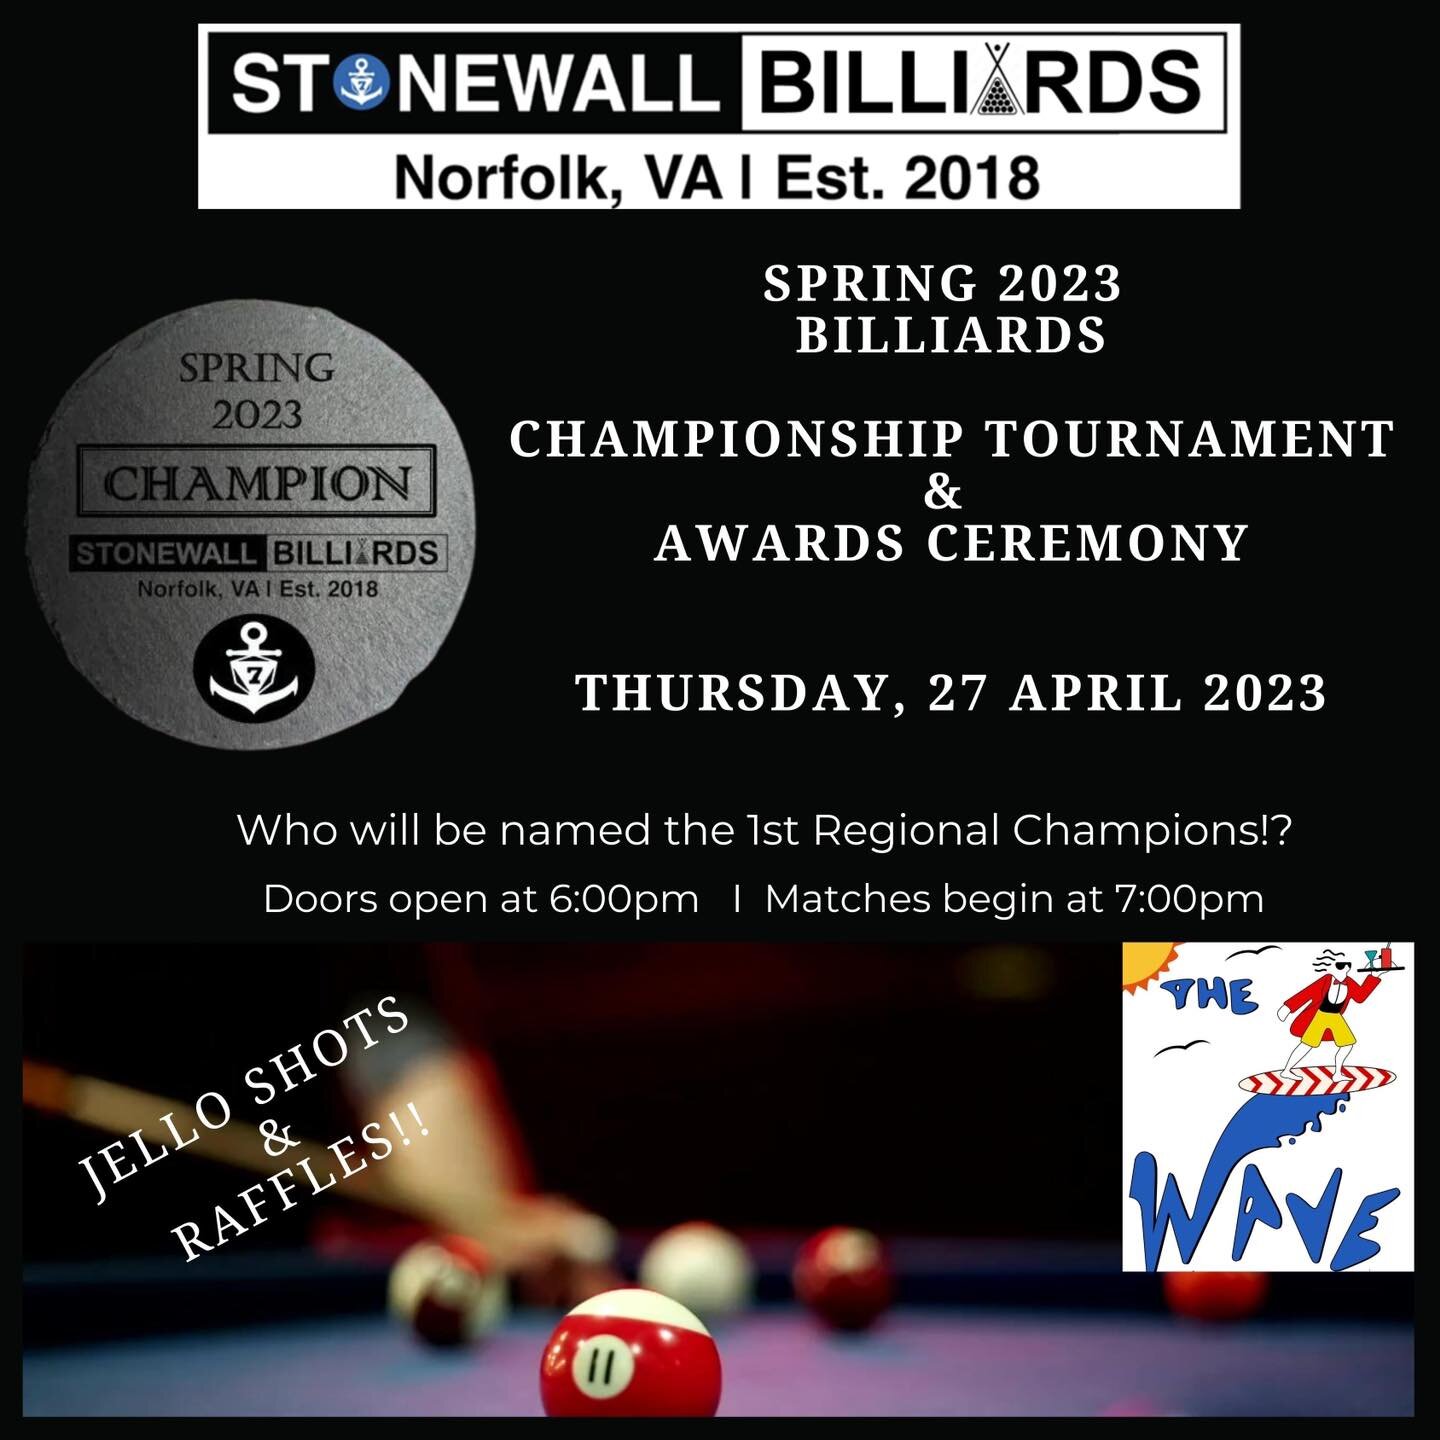 We are wrapping up our inaugural season of Billiards! What a season it has been. Tomorrow will be the tournament, so come out and help celebrate a successful first season!

#stonewallsportsnorfolk #stonewallsports